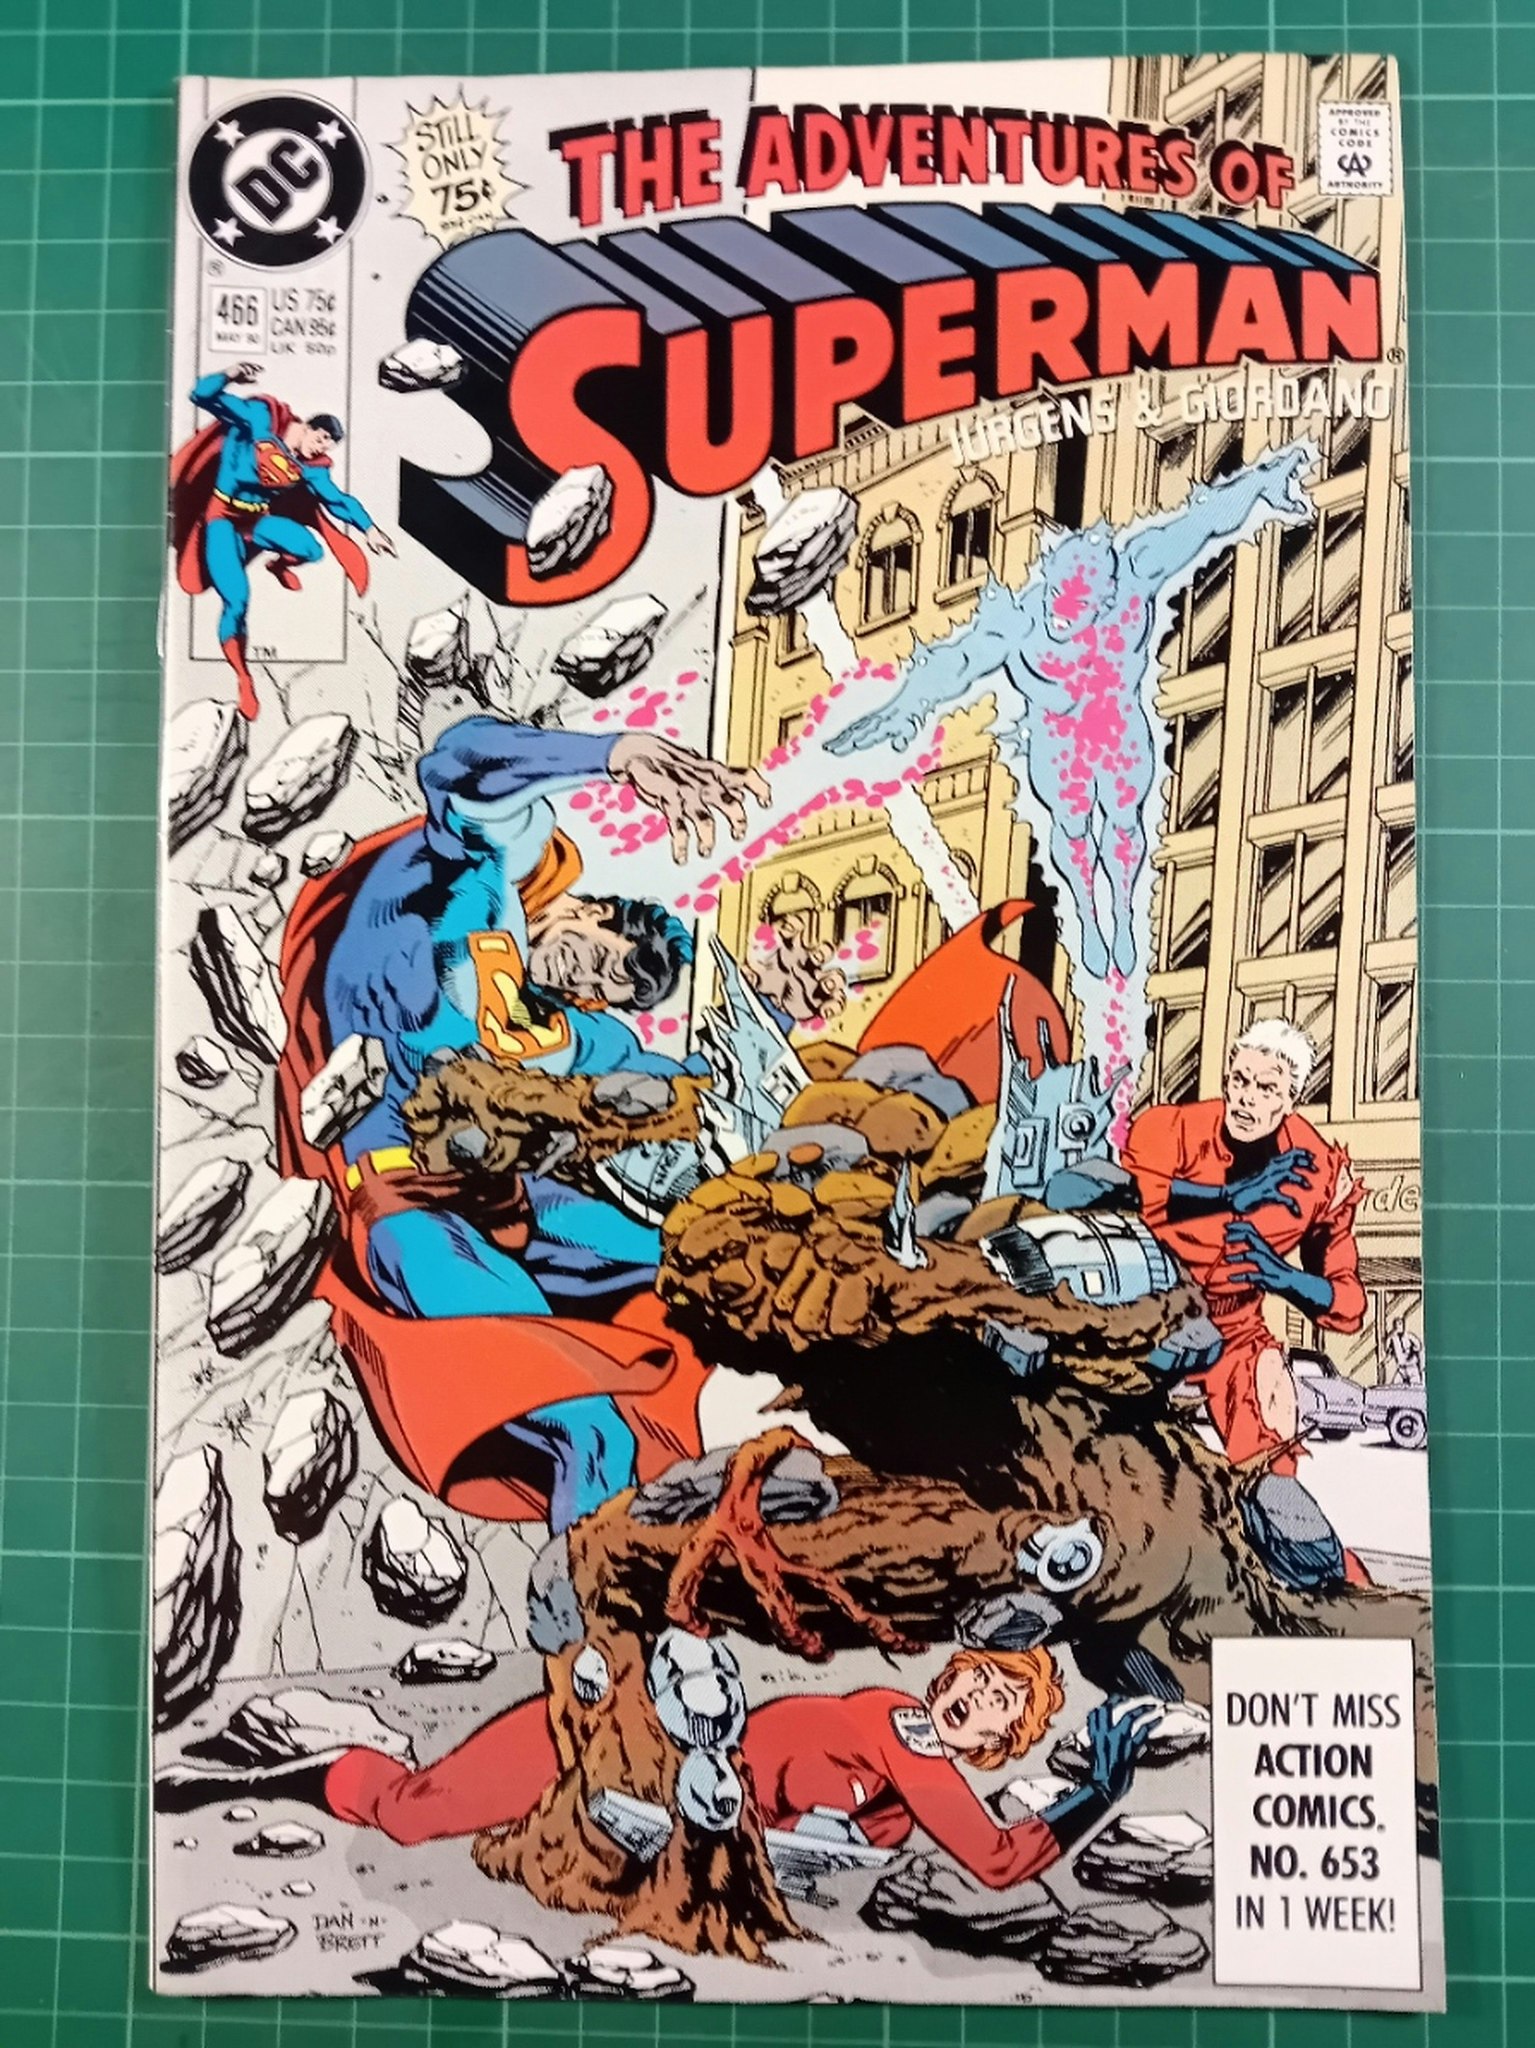 The adventures of Superman #466